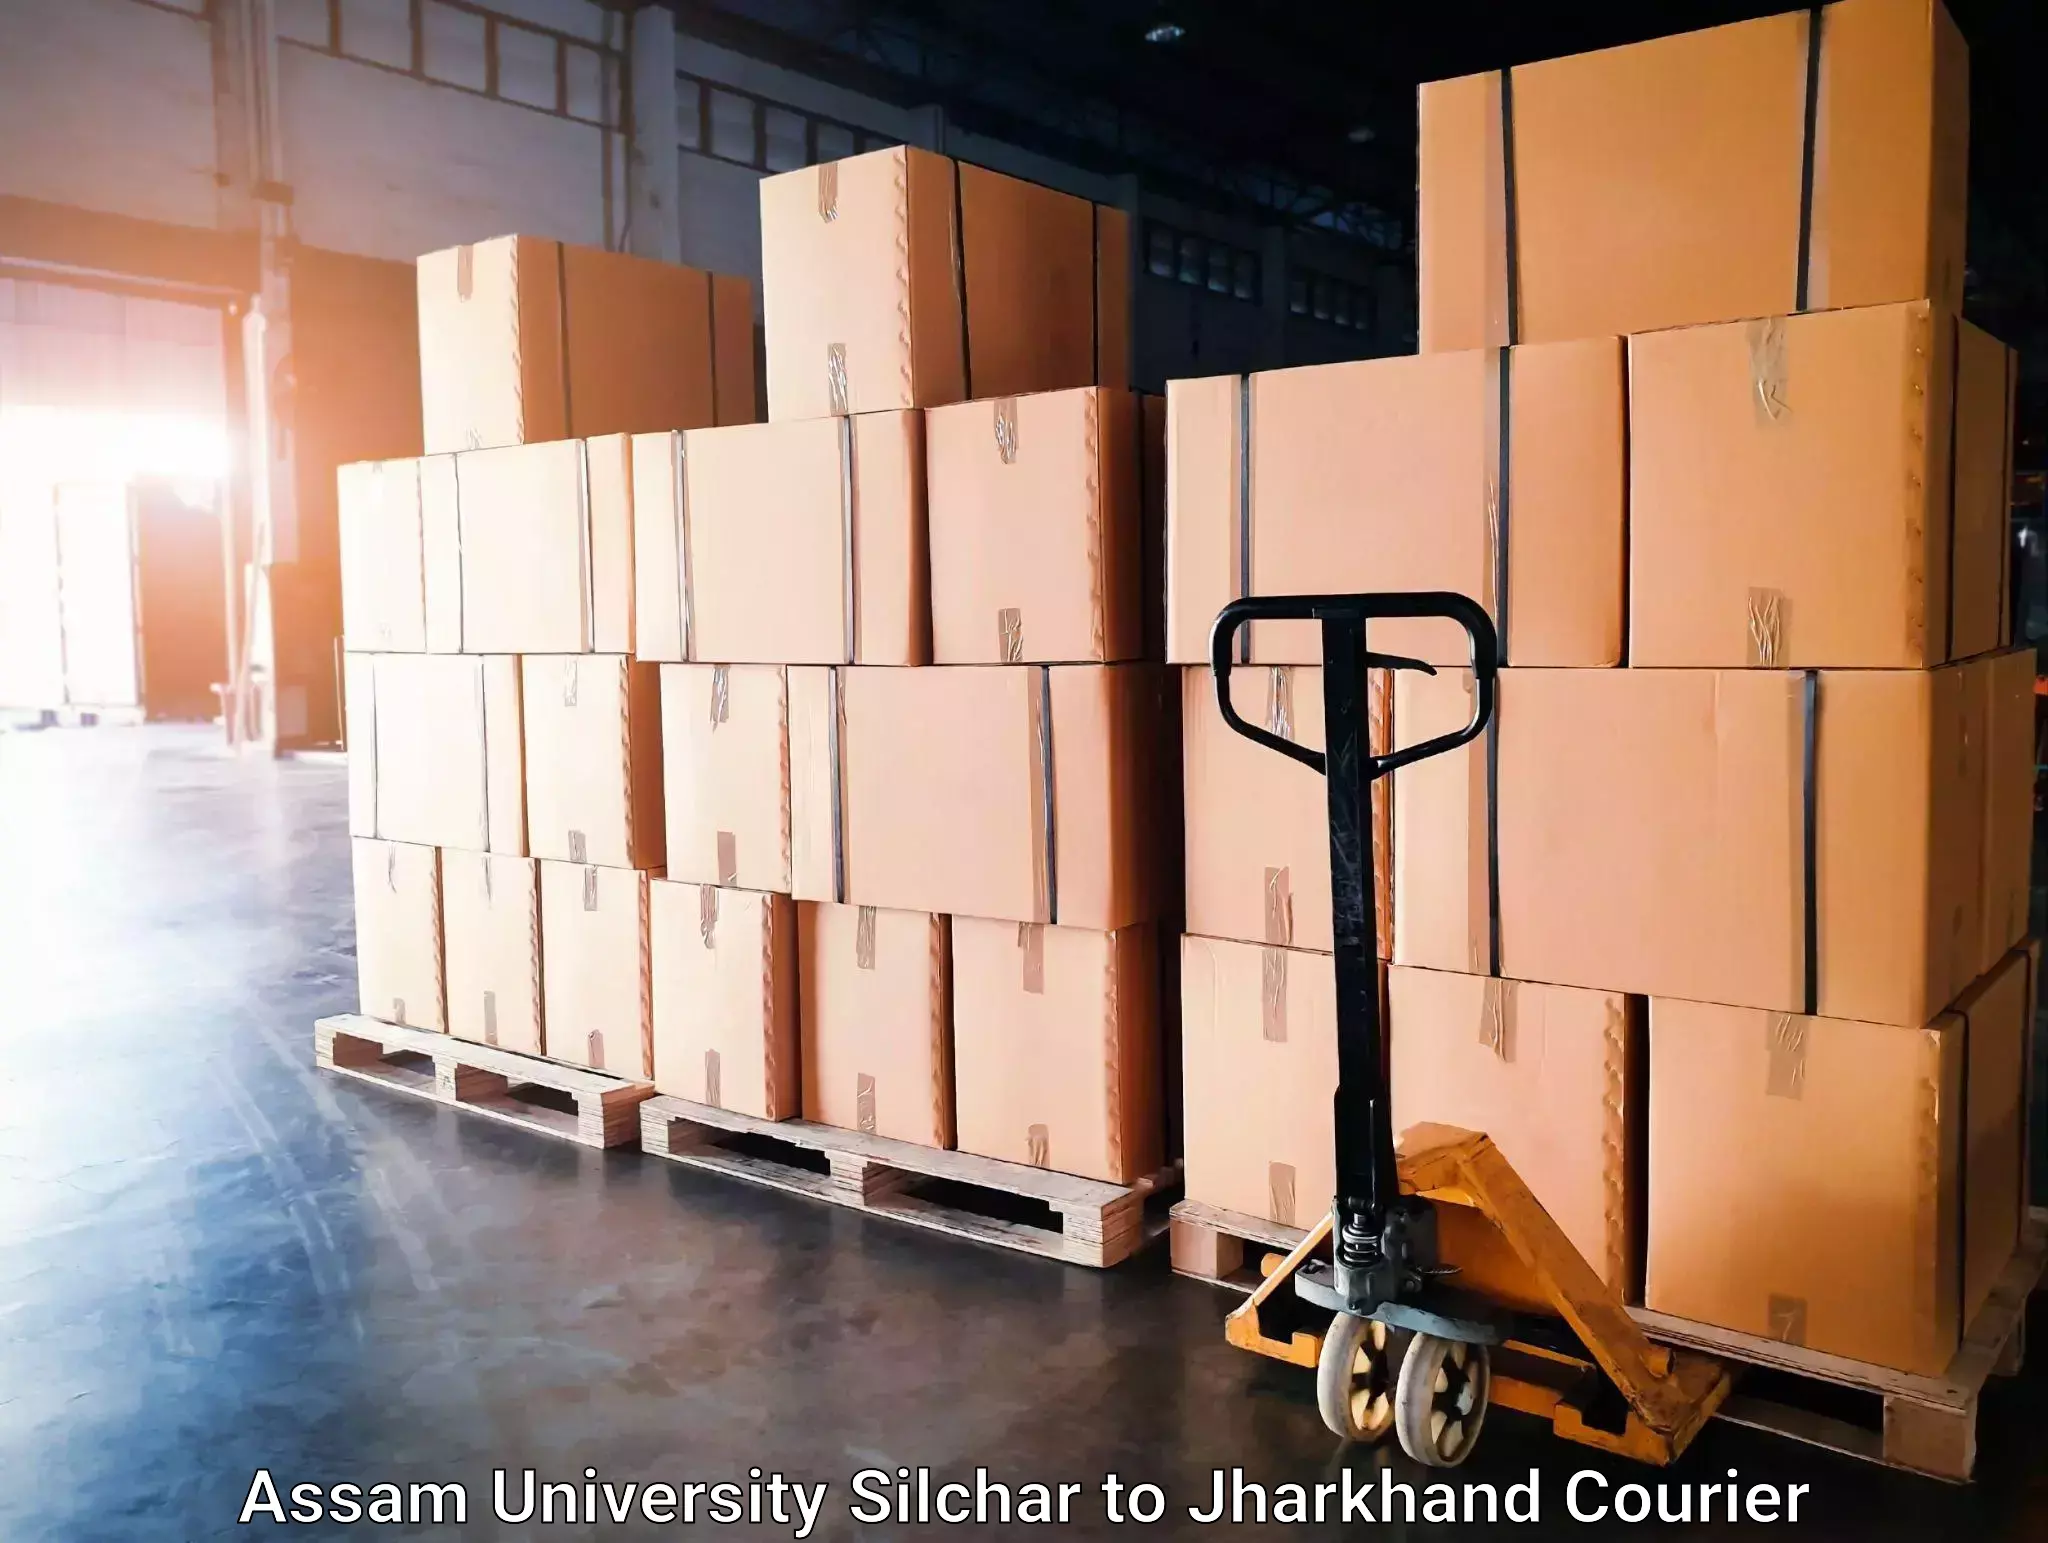 Advanced tracking systems in Assam University Silchar to Jharia